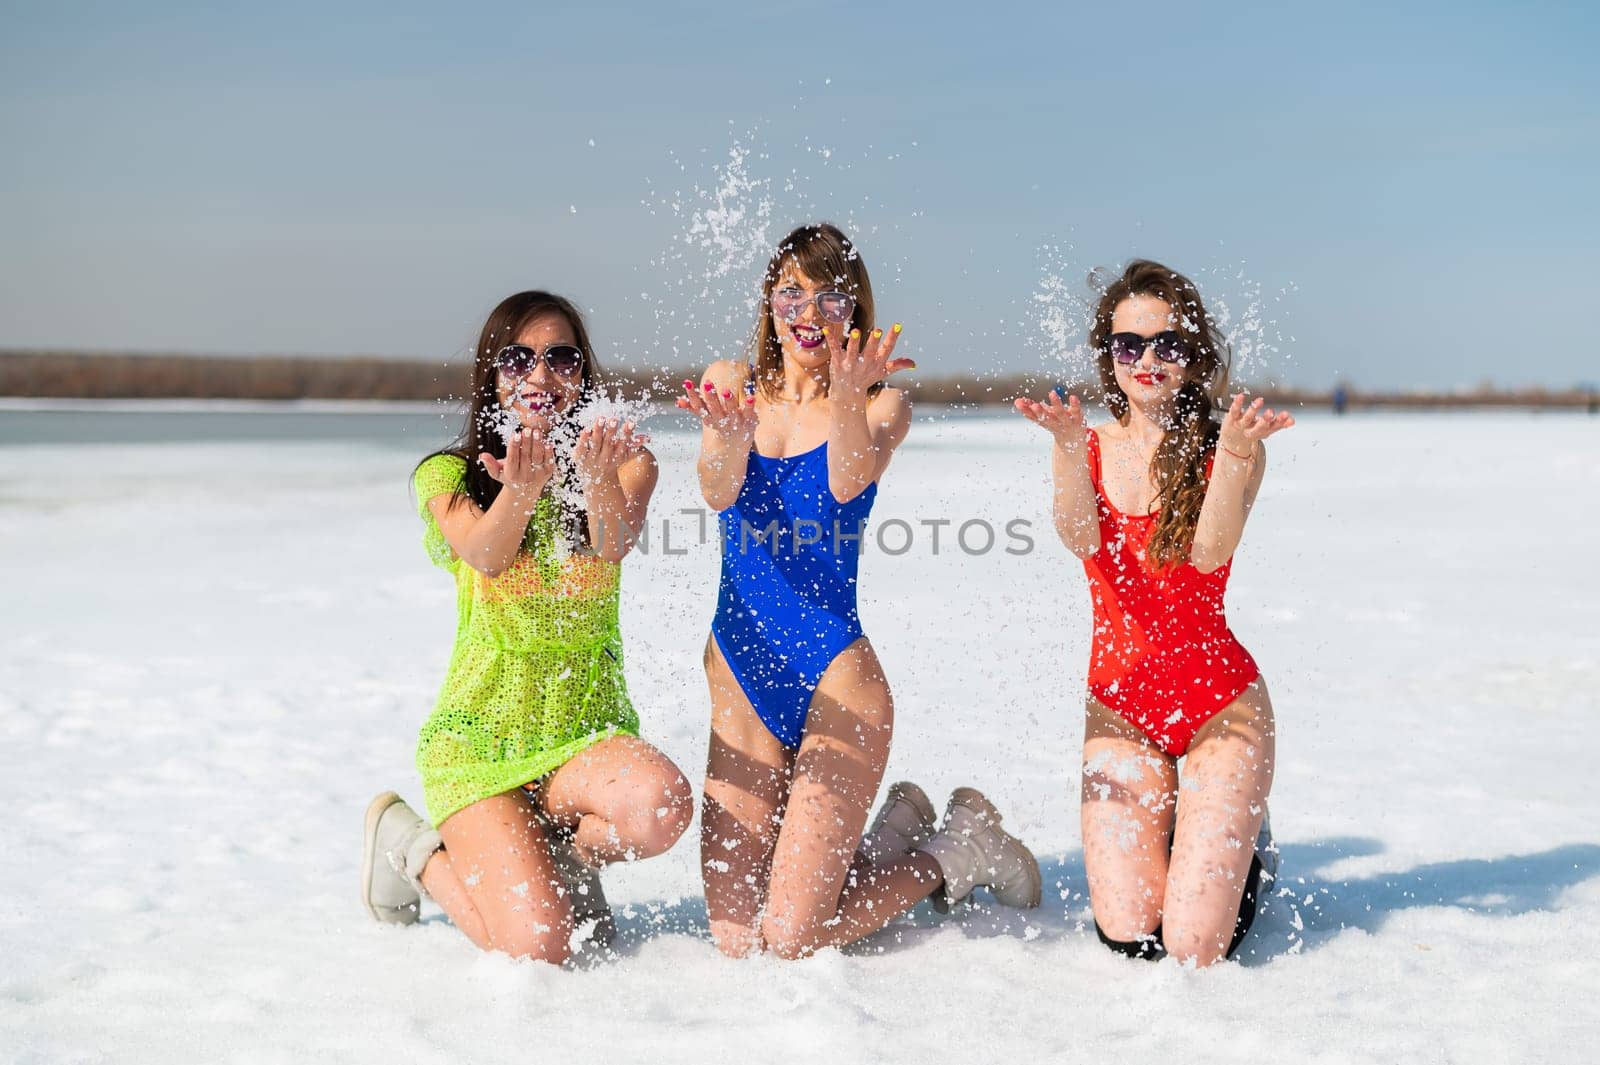 Three girlfriends in swimsuits are relaxing on a snow-covered beach. Hot girls posing in bikinis outdoors in winter